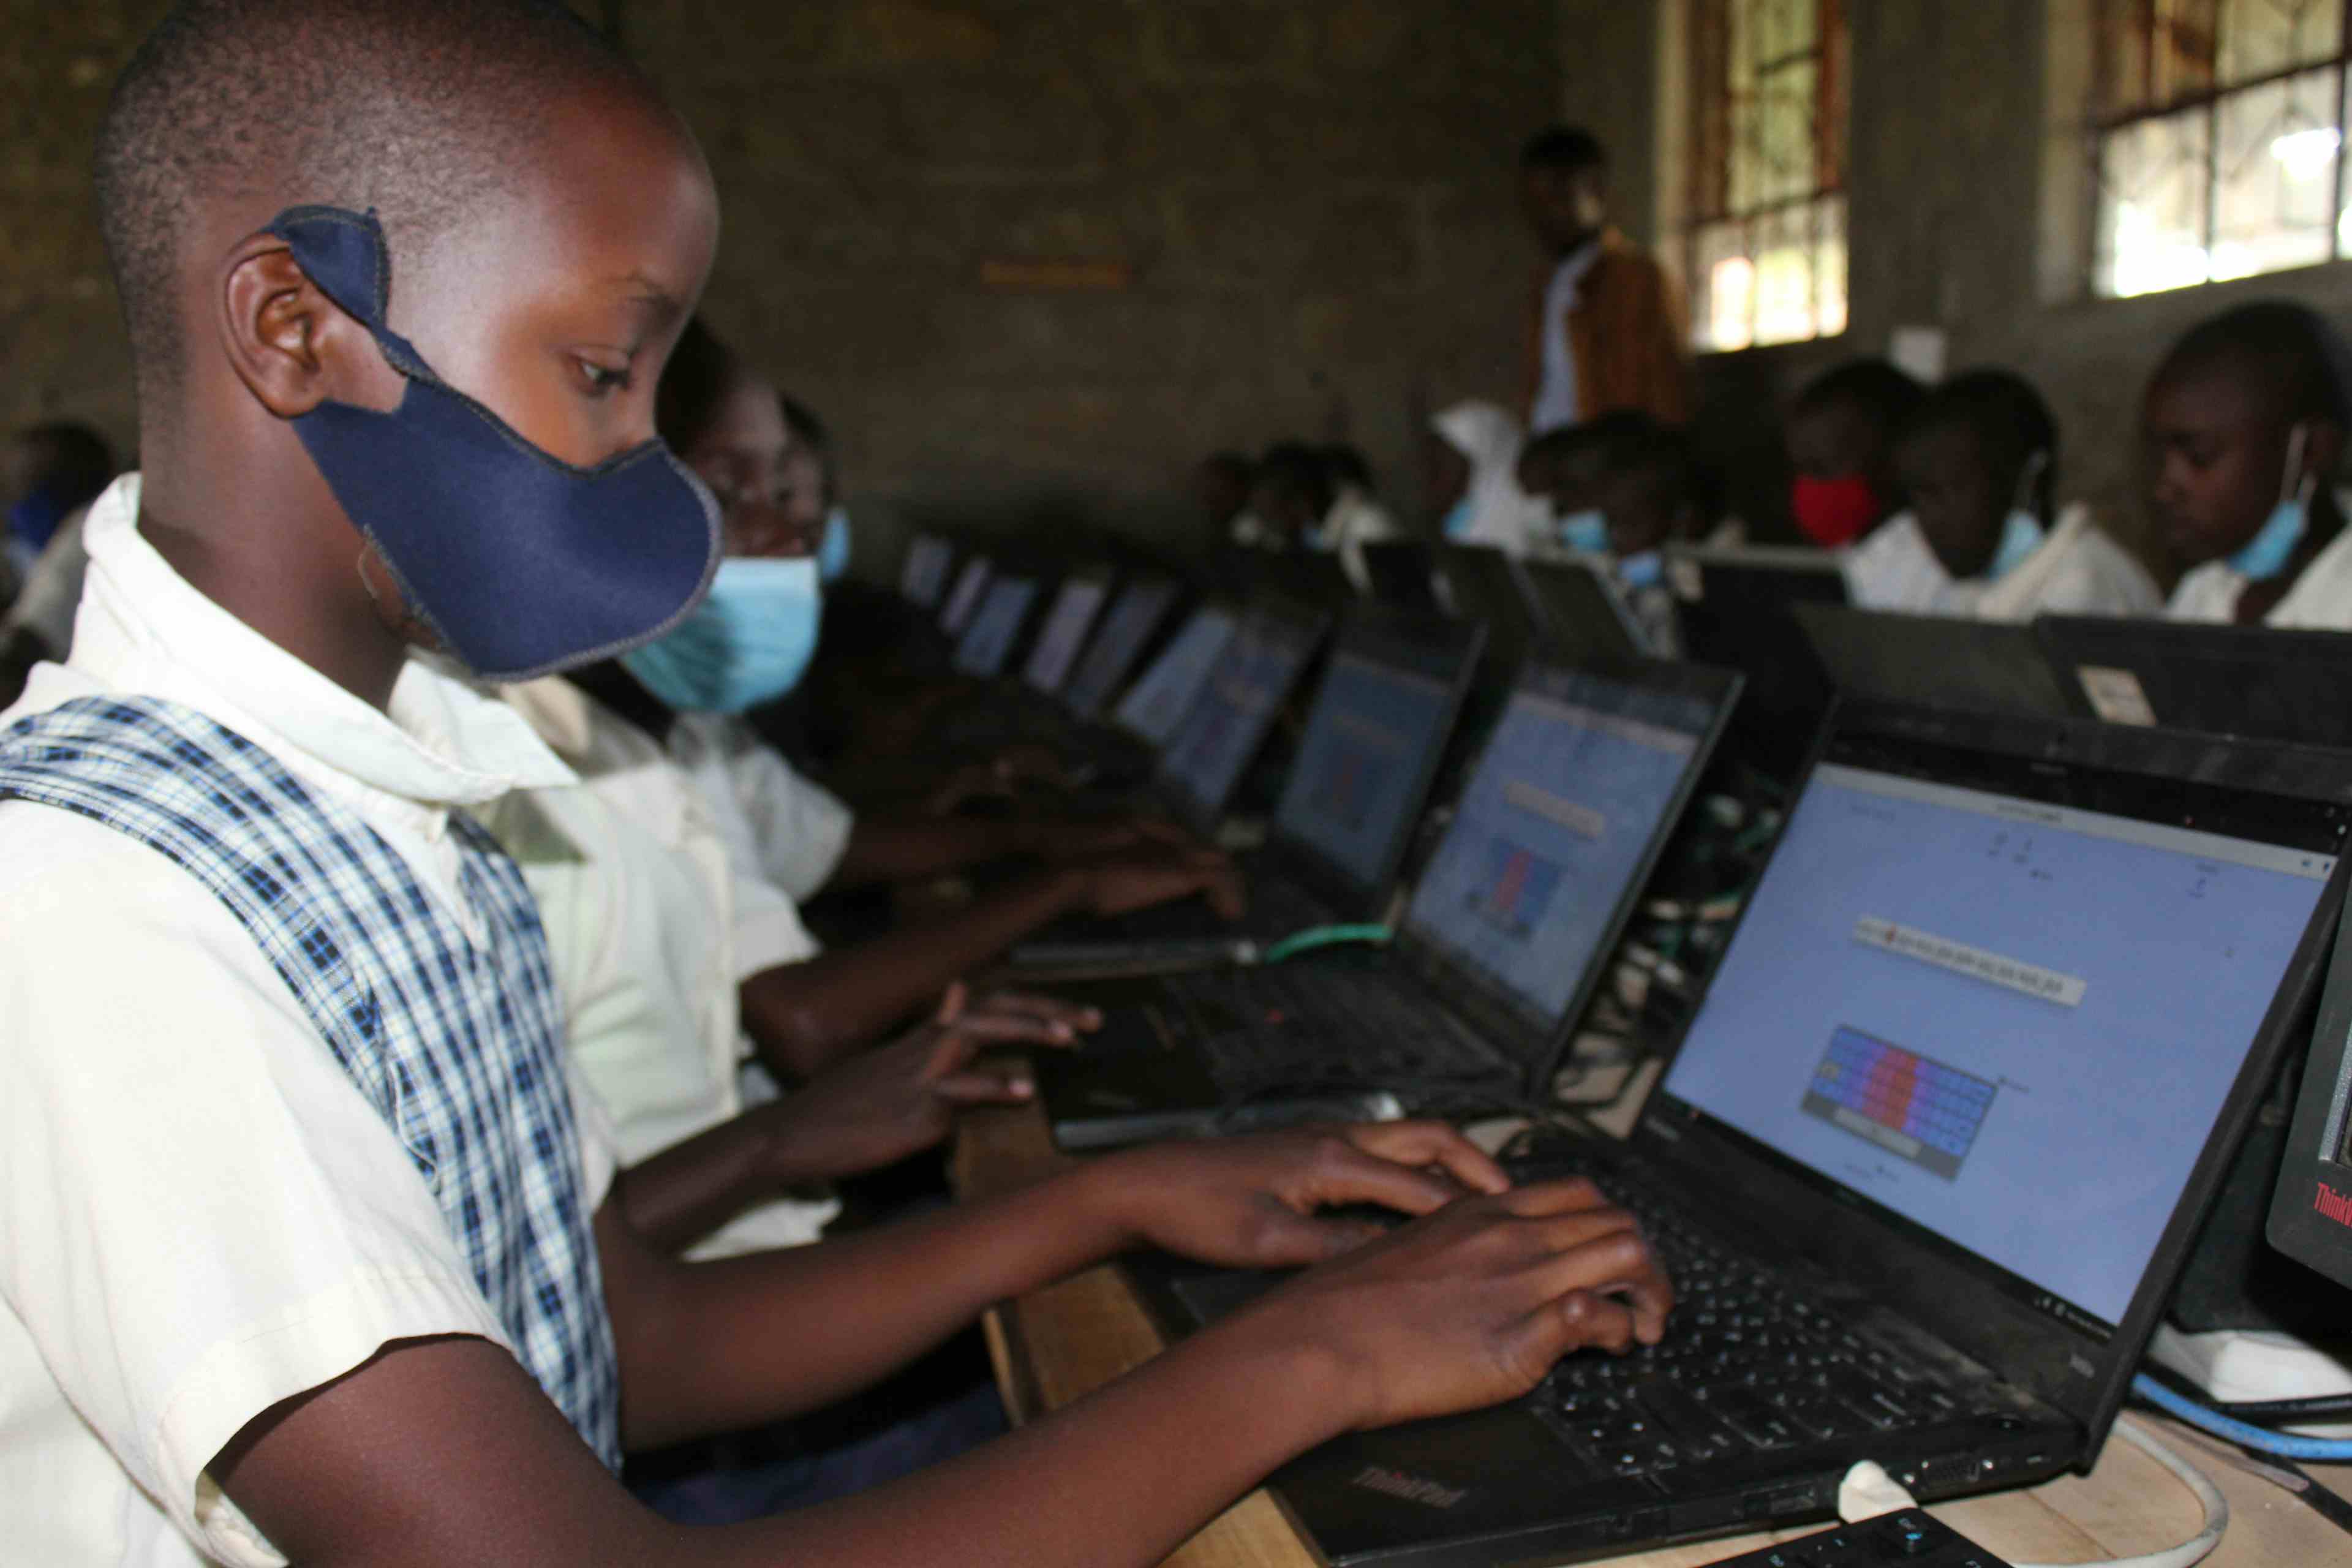 Reducing E Waste By Re-using IT Assets In Rural African Schools